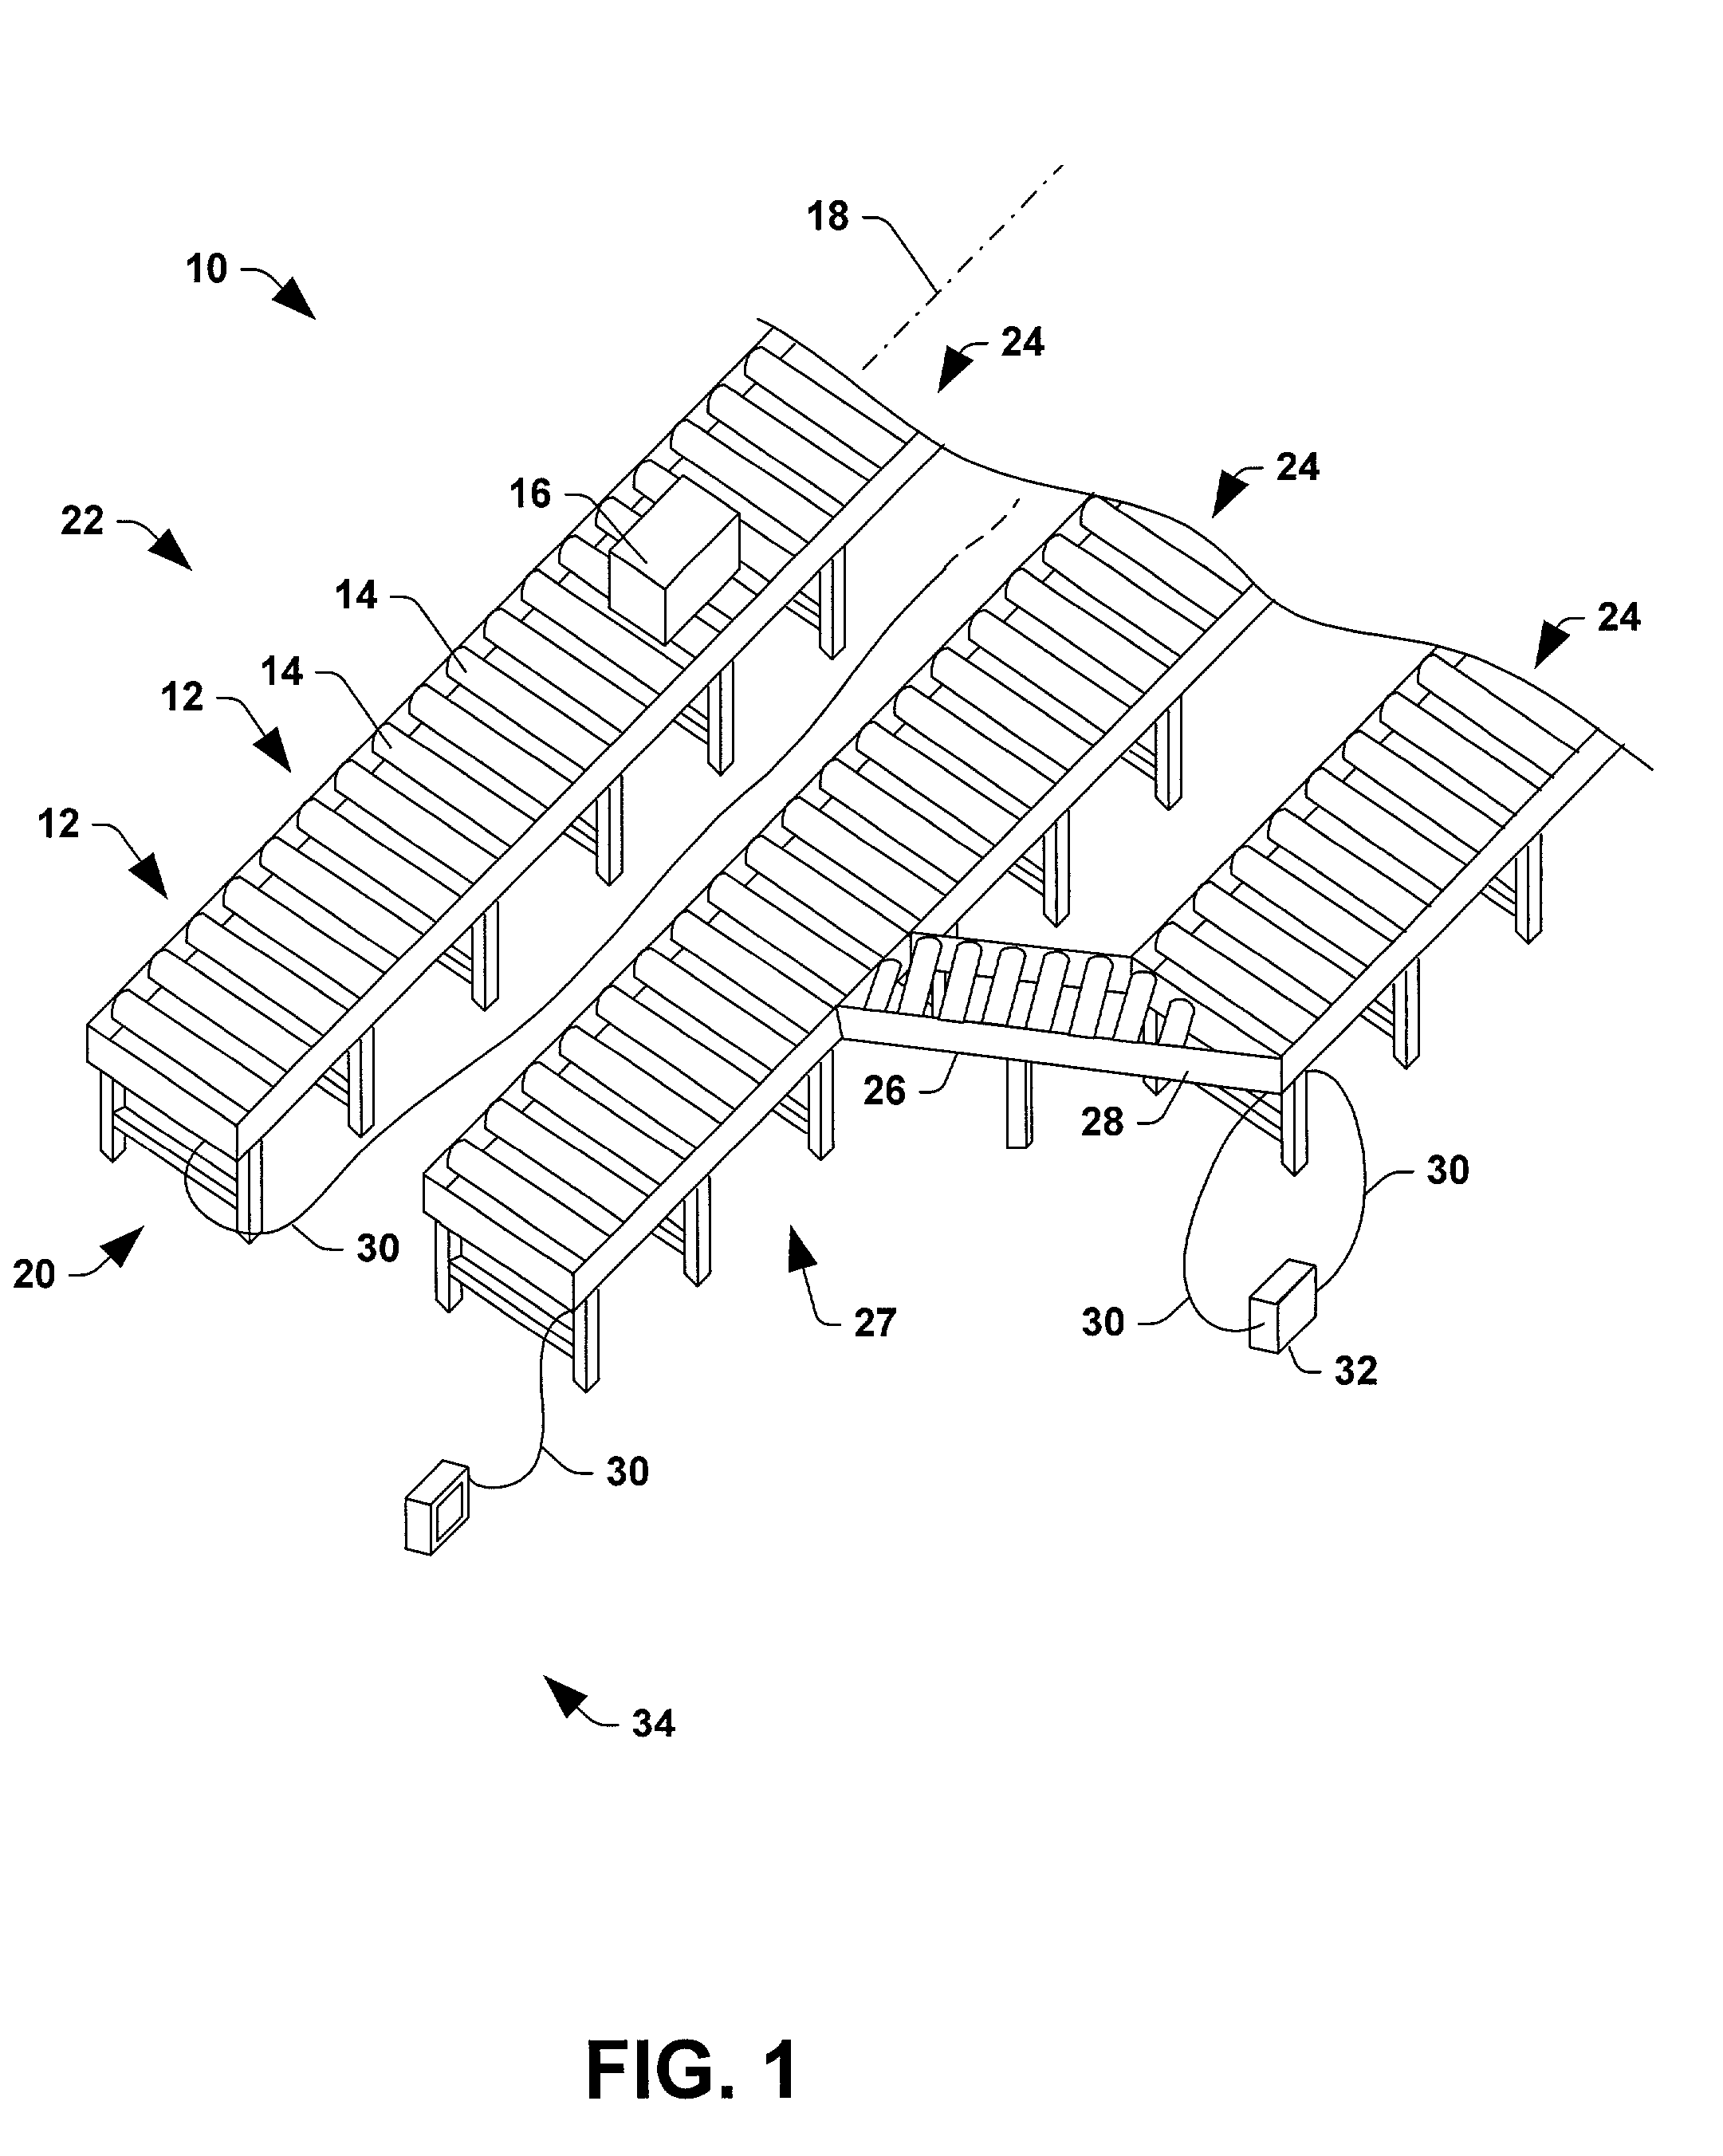 Driver board control system for modular conveyor with address-based network for inter-conveyer communication